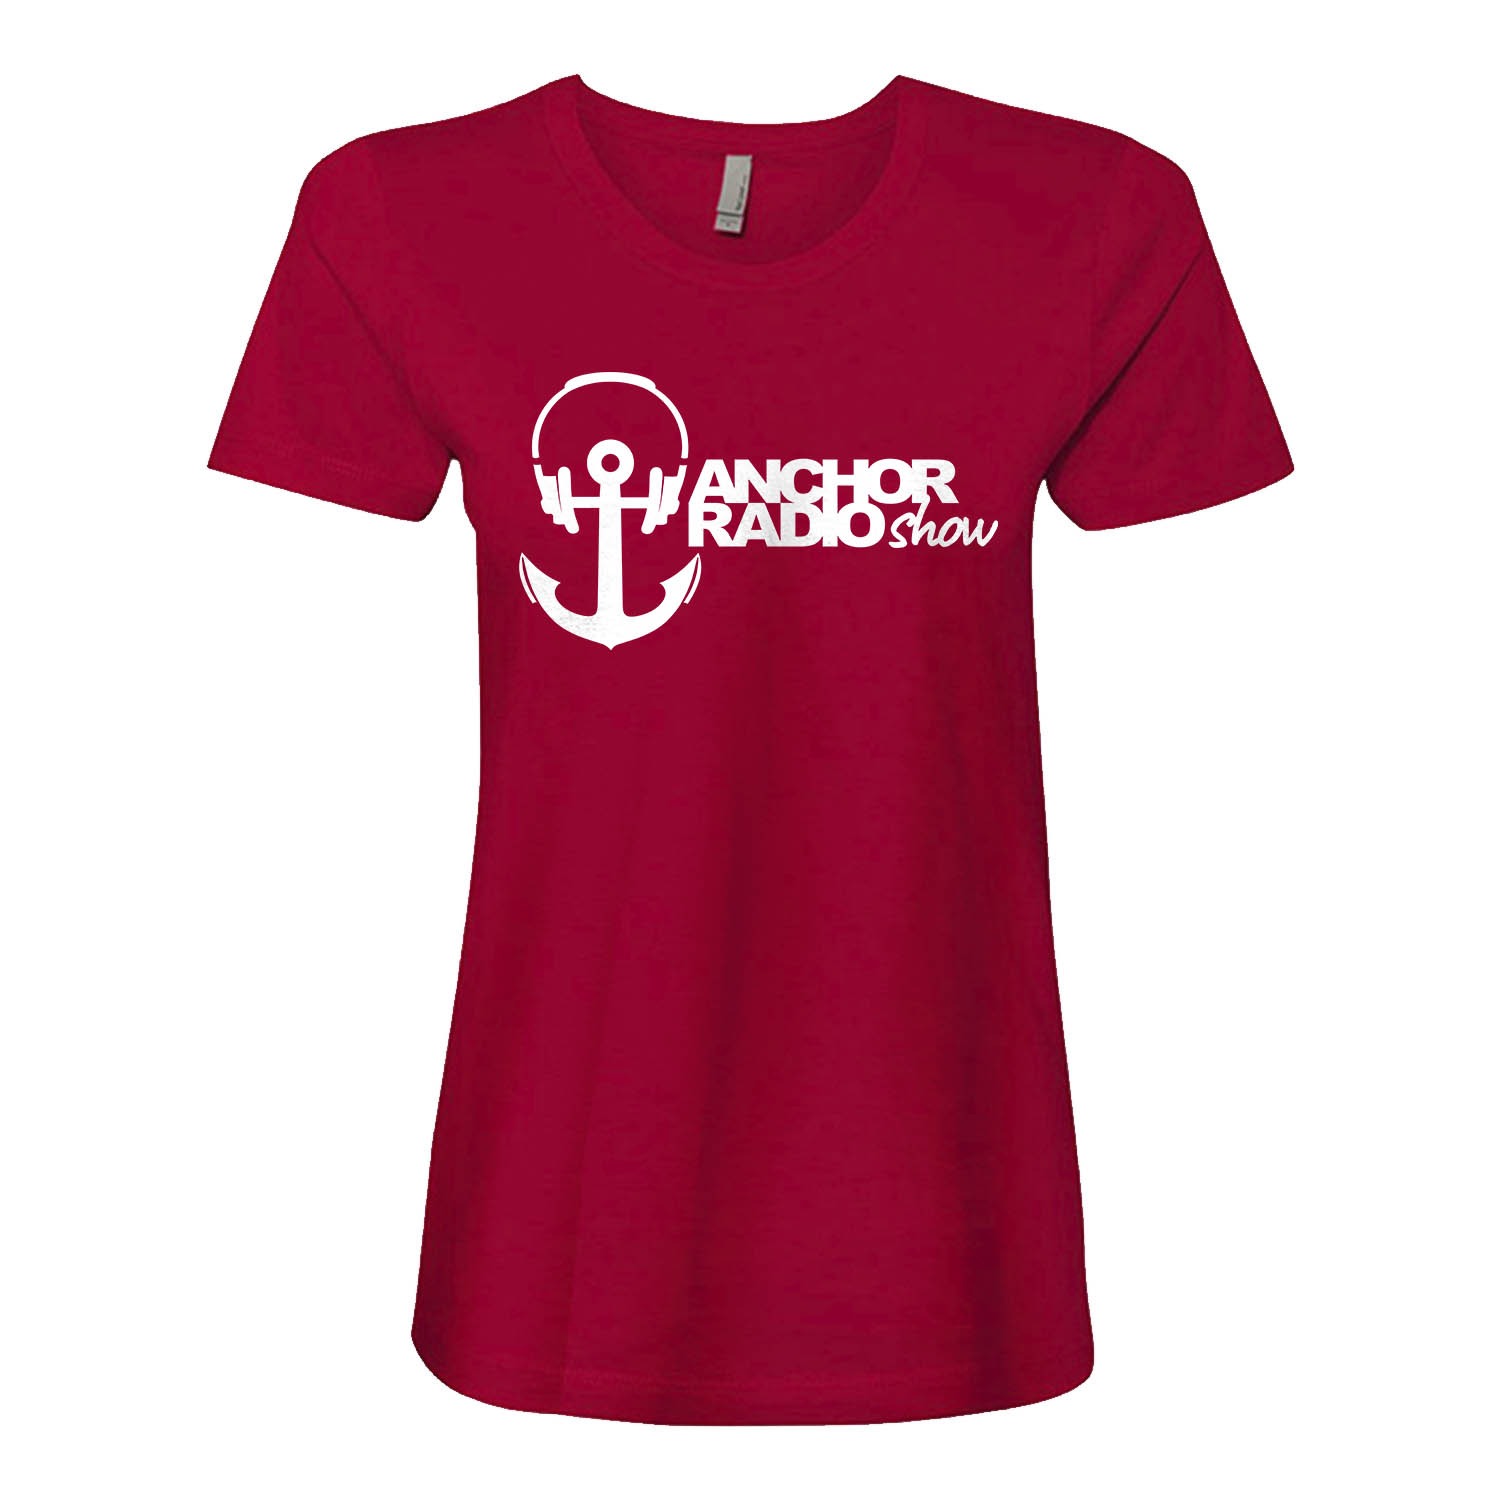 Anchor Radio Show Ladies Fitted T-shirt, The Troprock Shop